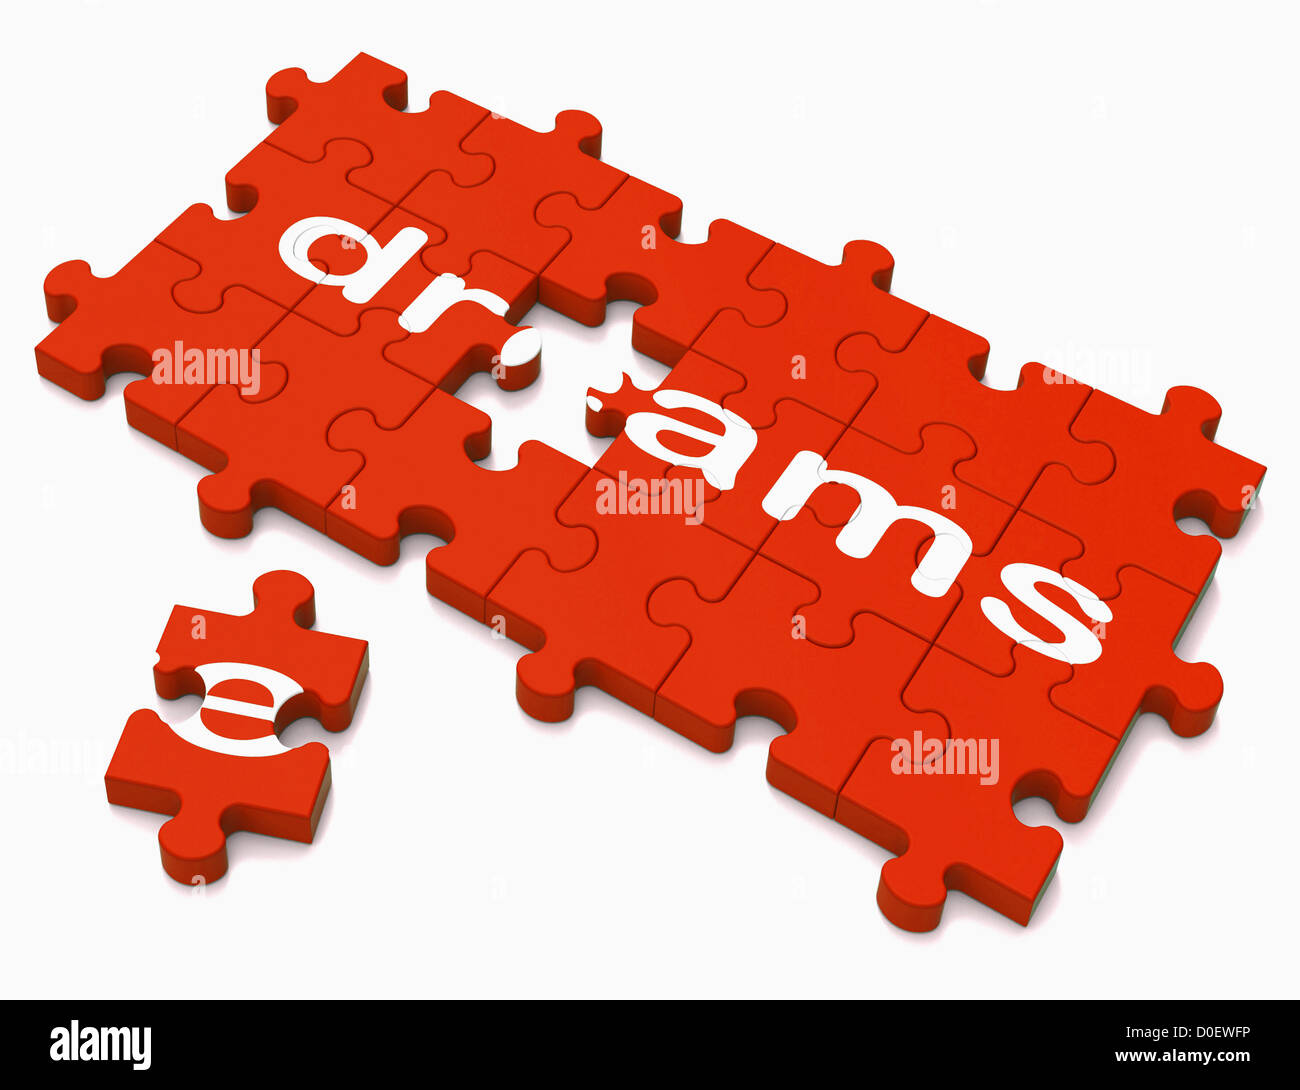 Dreams Sign Showing Hope And Desires Stock Photo